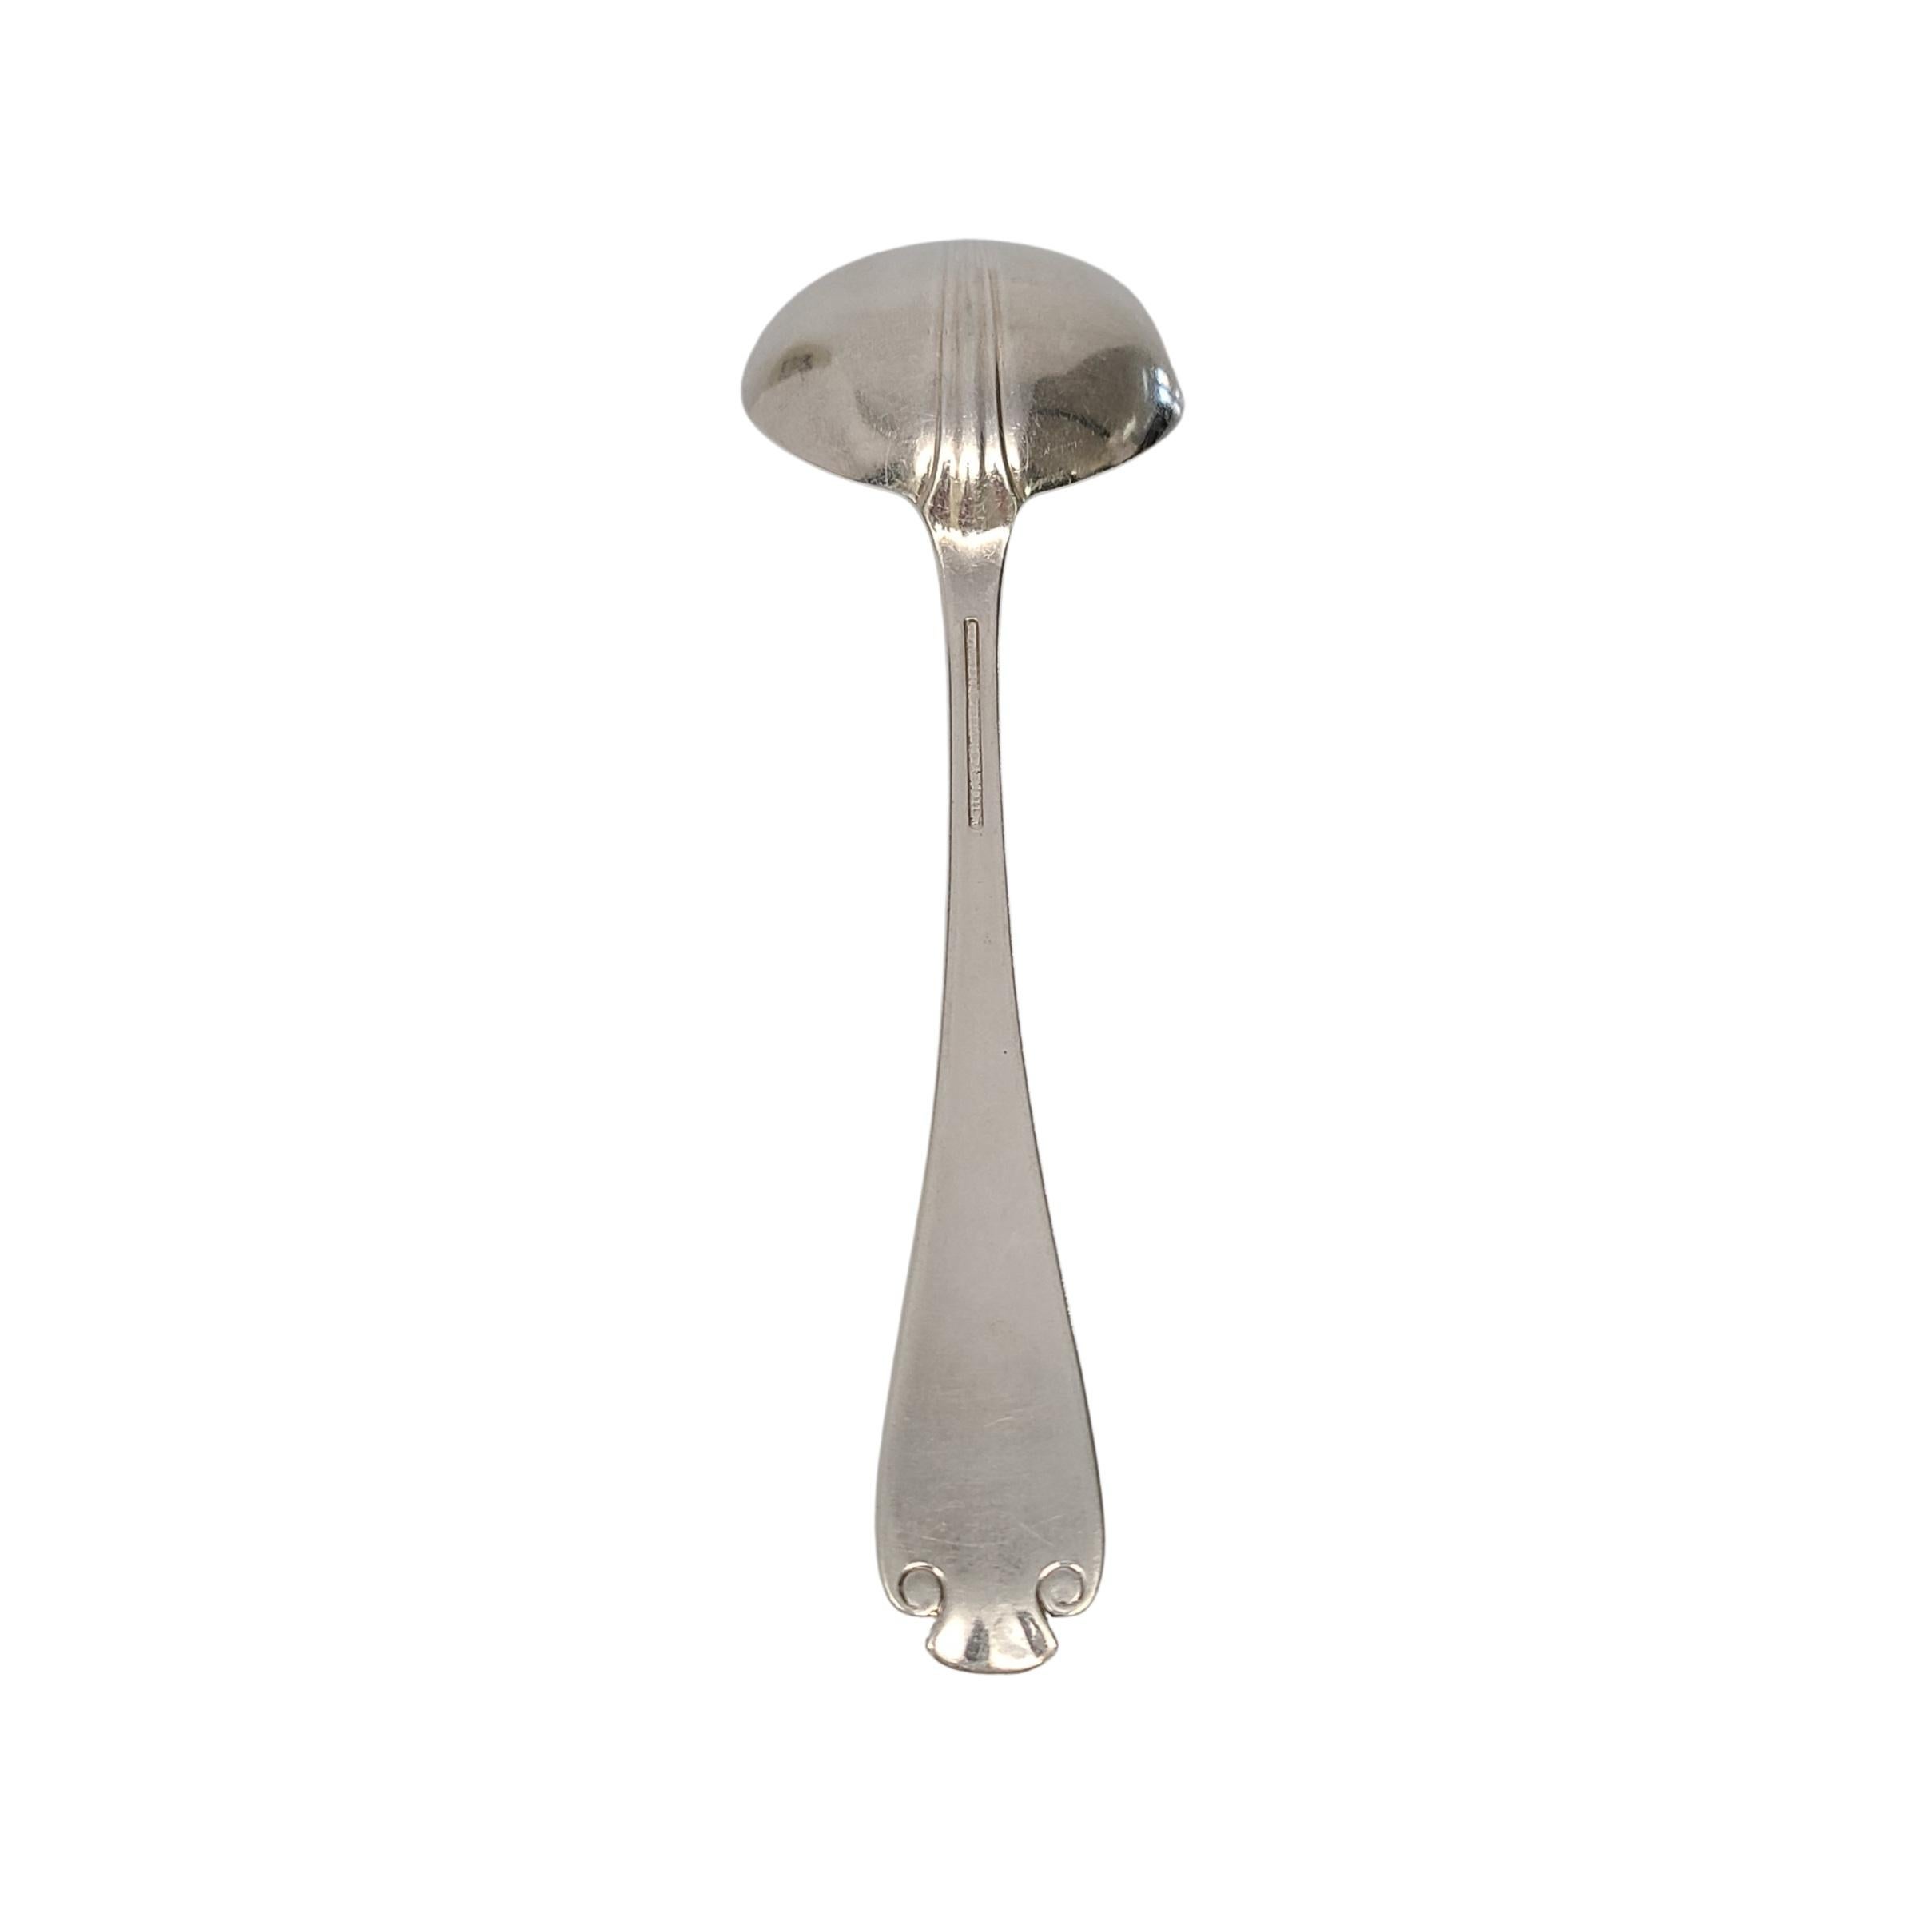 Sterling silver gravy ladle by Tiffany & Co in the Flemish pattern.

Monogram appears to be EWM

Beautiful gravy ladle in the Flemish pattern, featuring a simple and elegant scroll design, making it a timeless classic that is still in demand today.